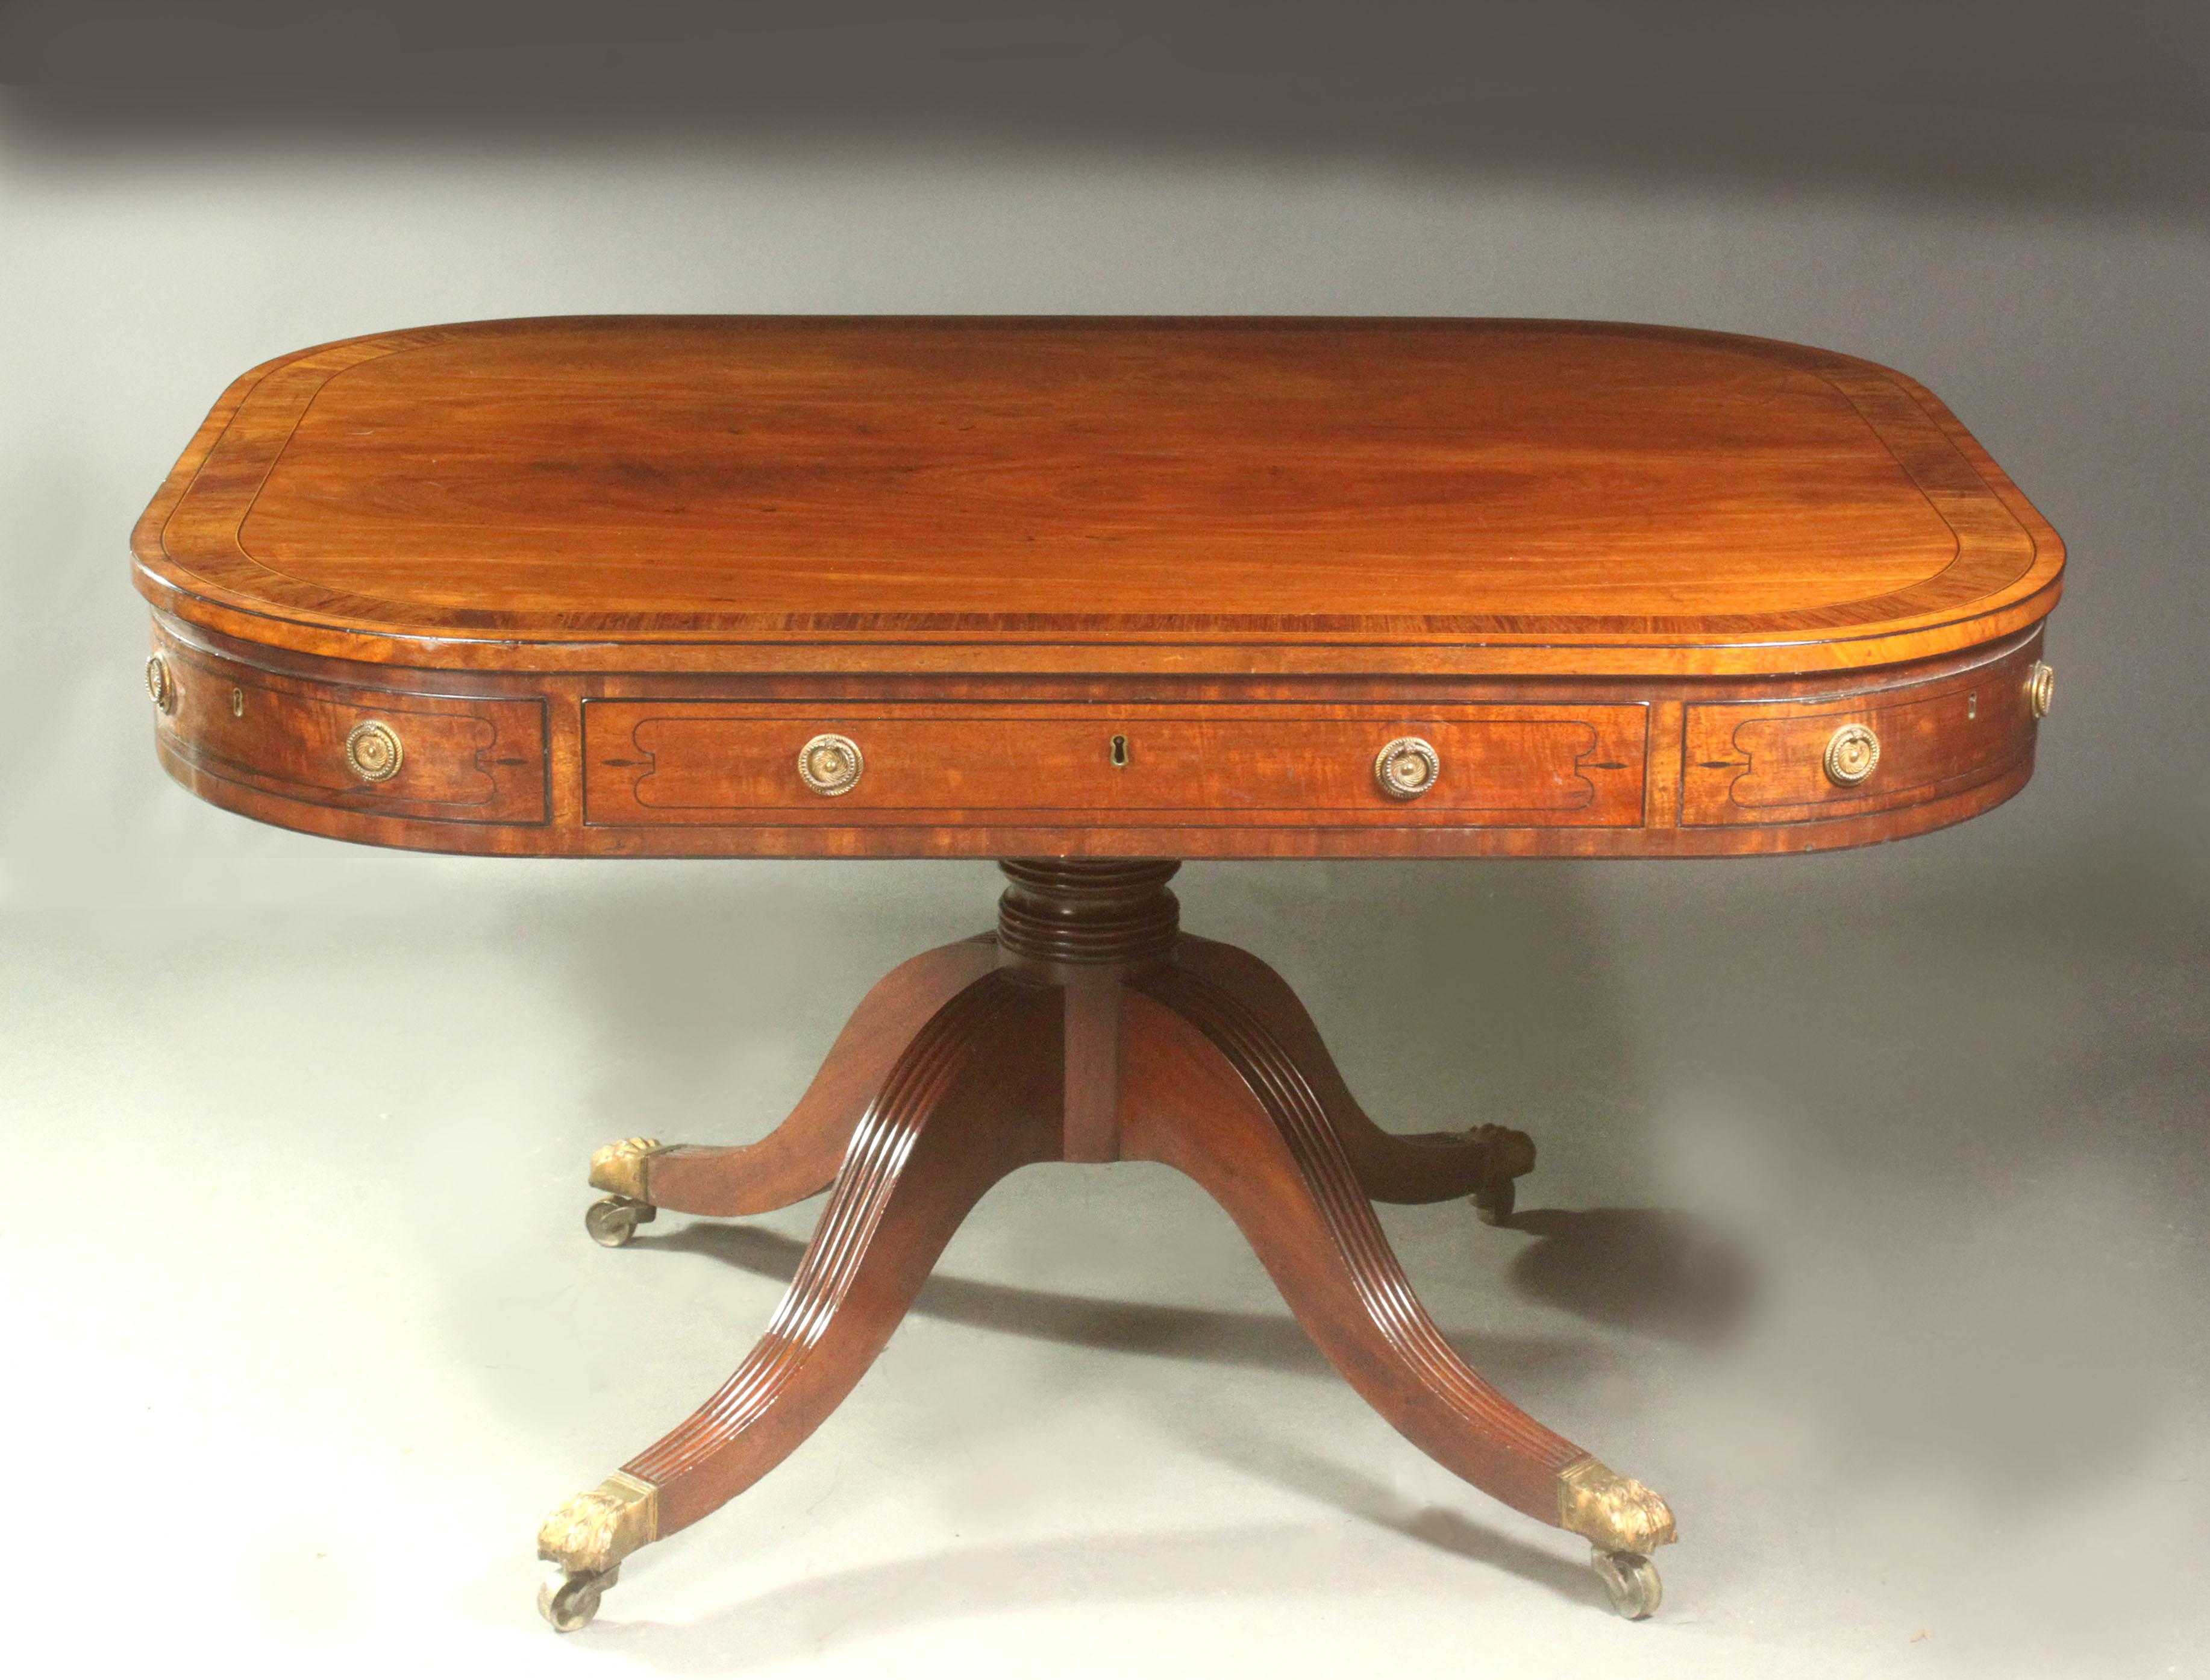 A fine Regency mahogany centre table in the manner of Gillows of Lancaster; the four-splay reeded sabre leg base with turned pillar; the figured mahogany top with kingwood cross-banding and boxwood and ebony stringing; the carcase fronts with